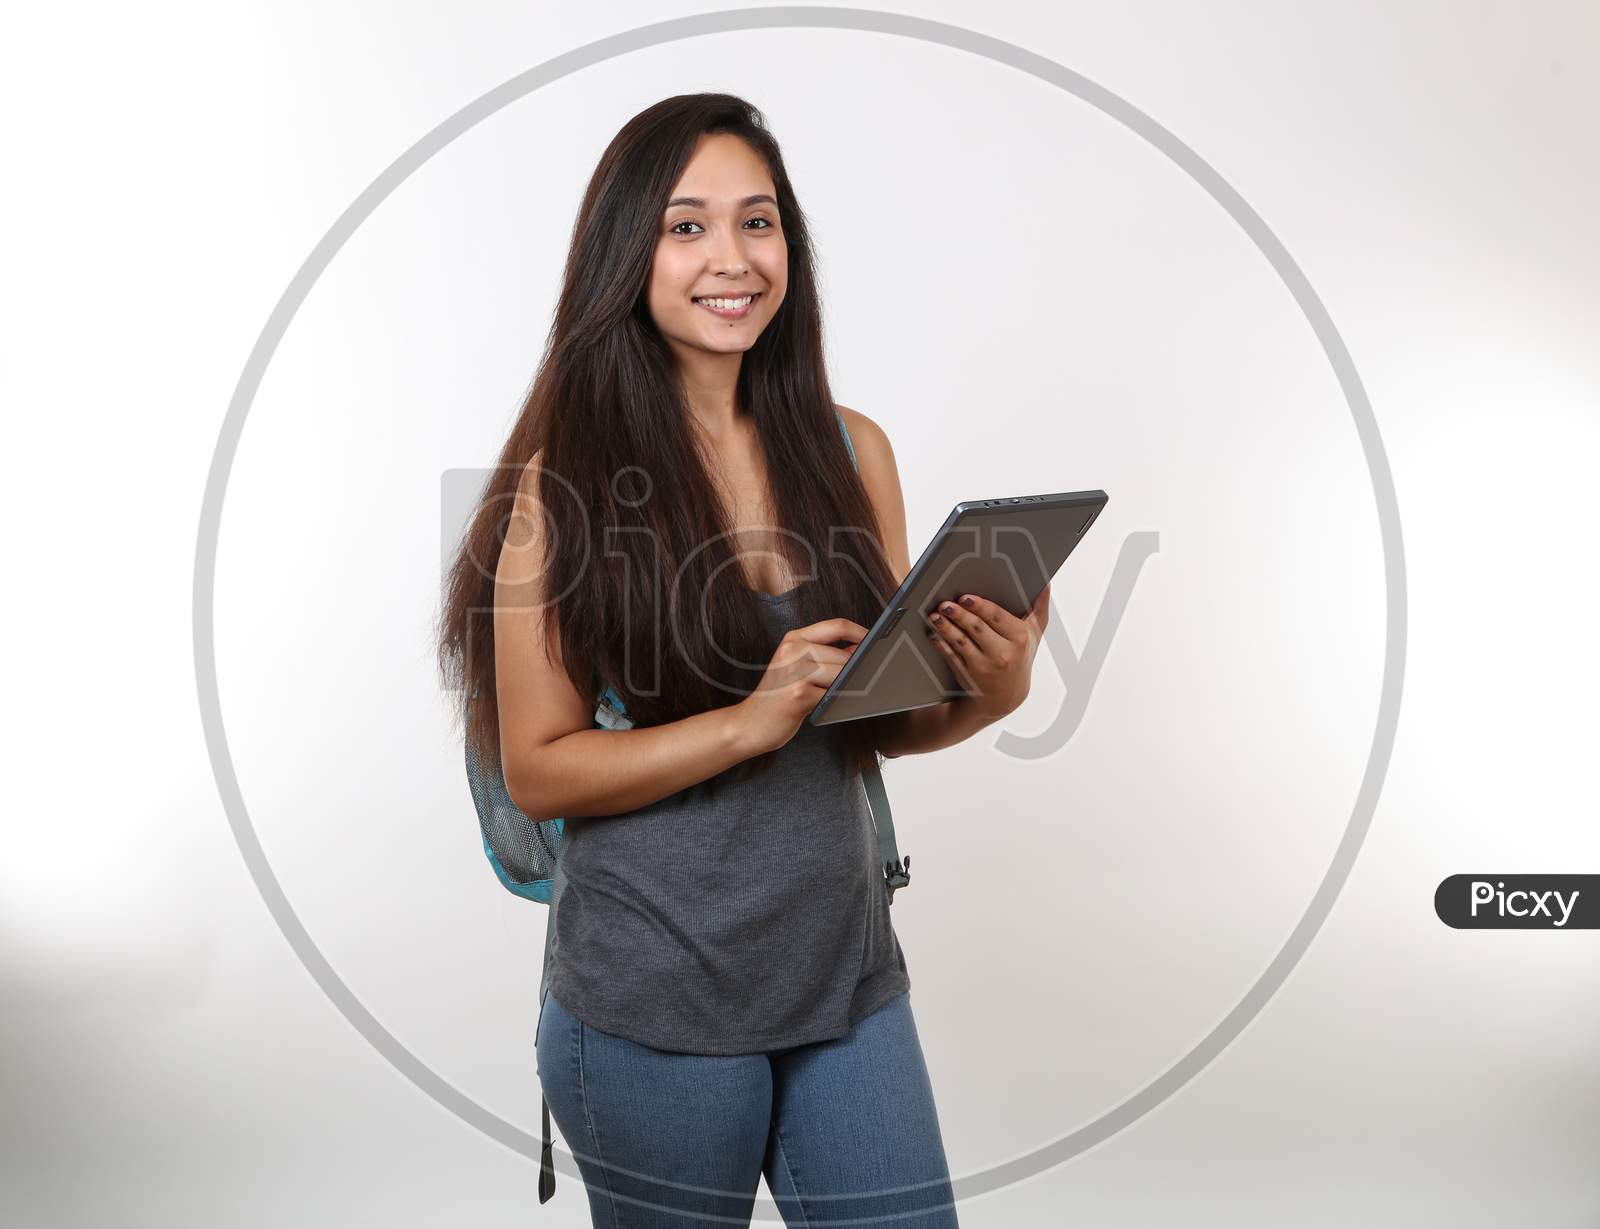 A Young Hispanic Student Wearing A Blue Backpack And Grey Shirt Smiles And She Holds Her Digital Device.